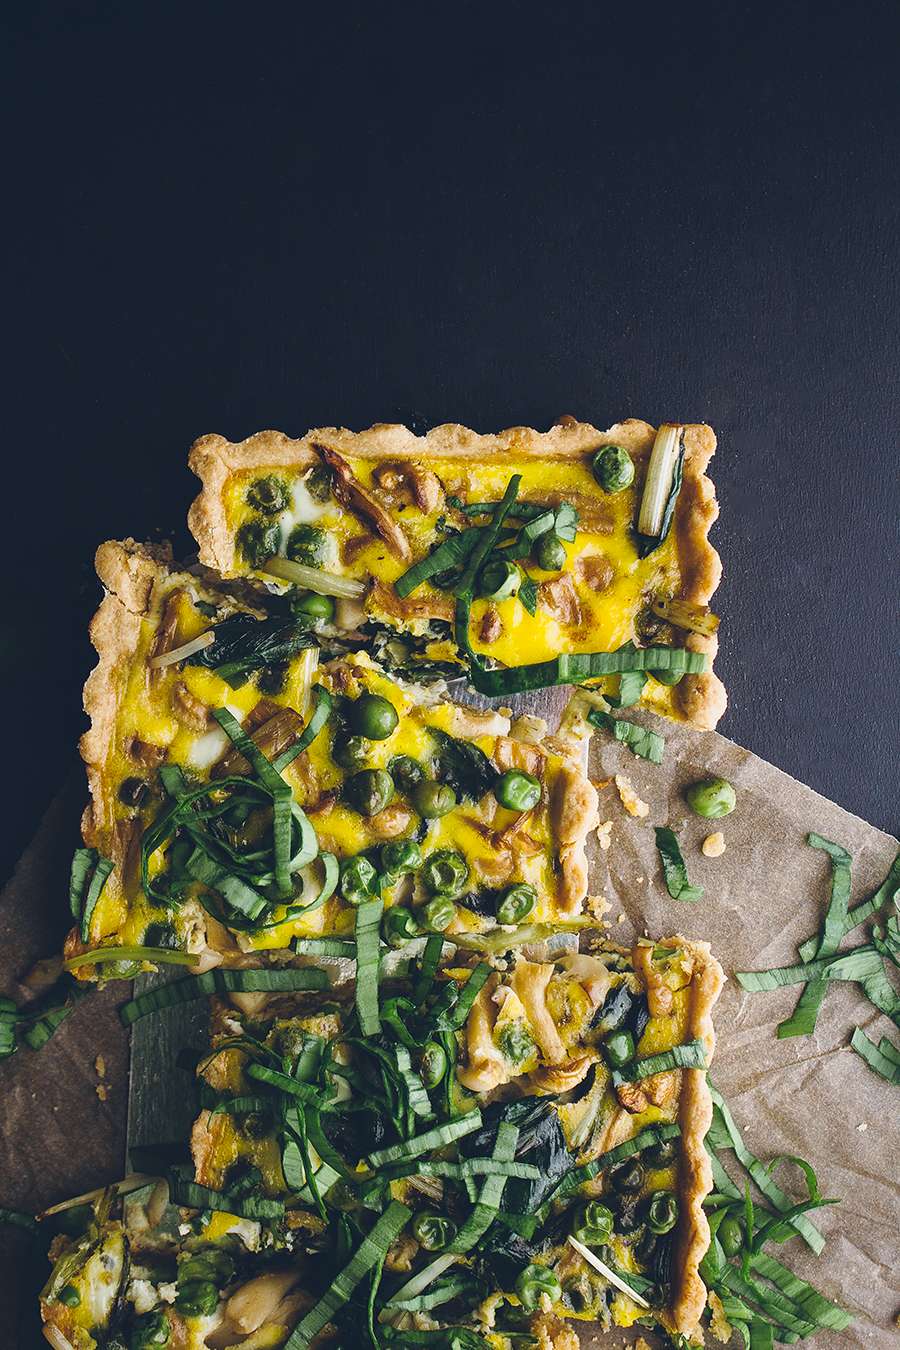 Quiche with vegetables garnished with ramp slices.